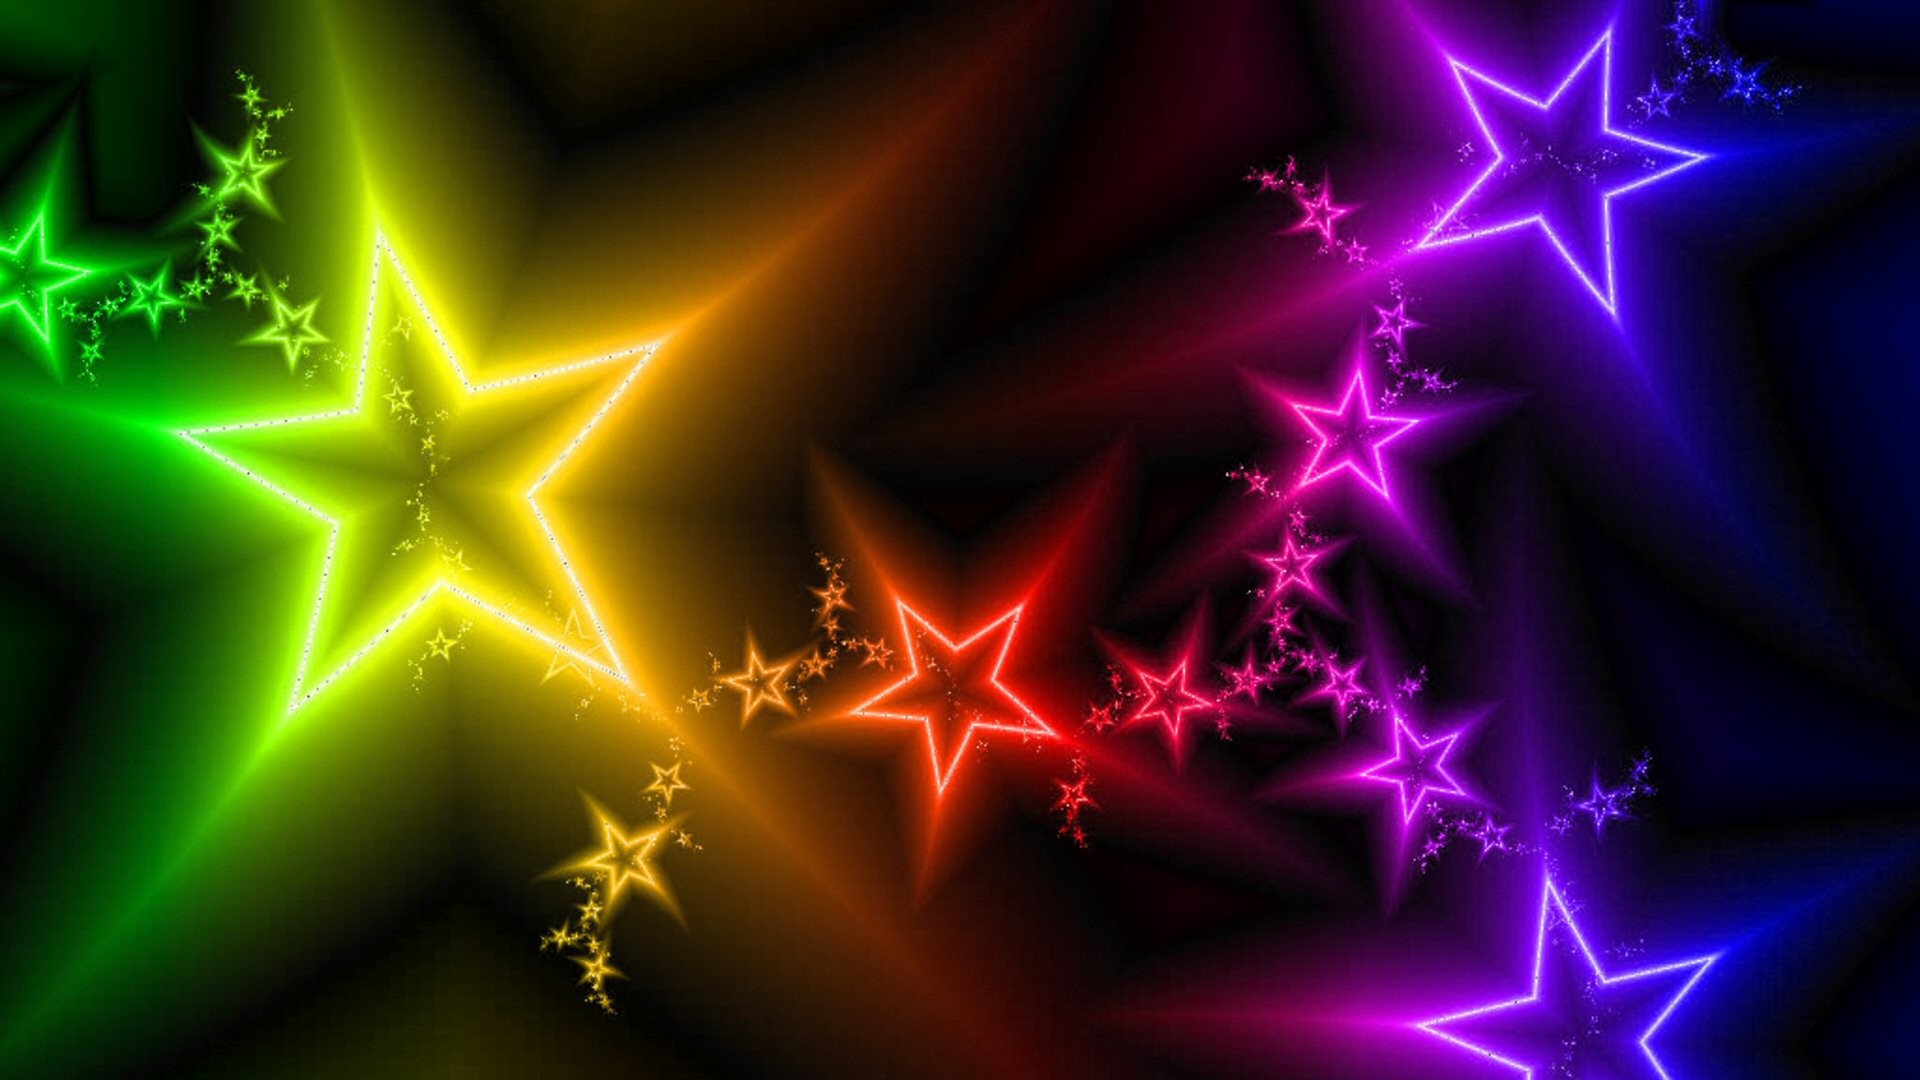 1920x1080 Cool Backgrounds Hd Stars Free cool backgrounds full hd